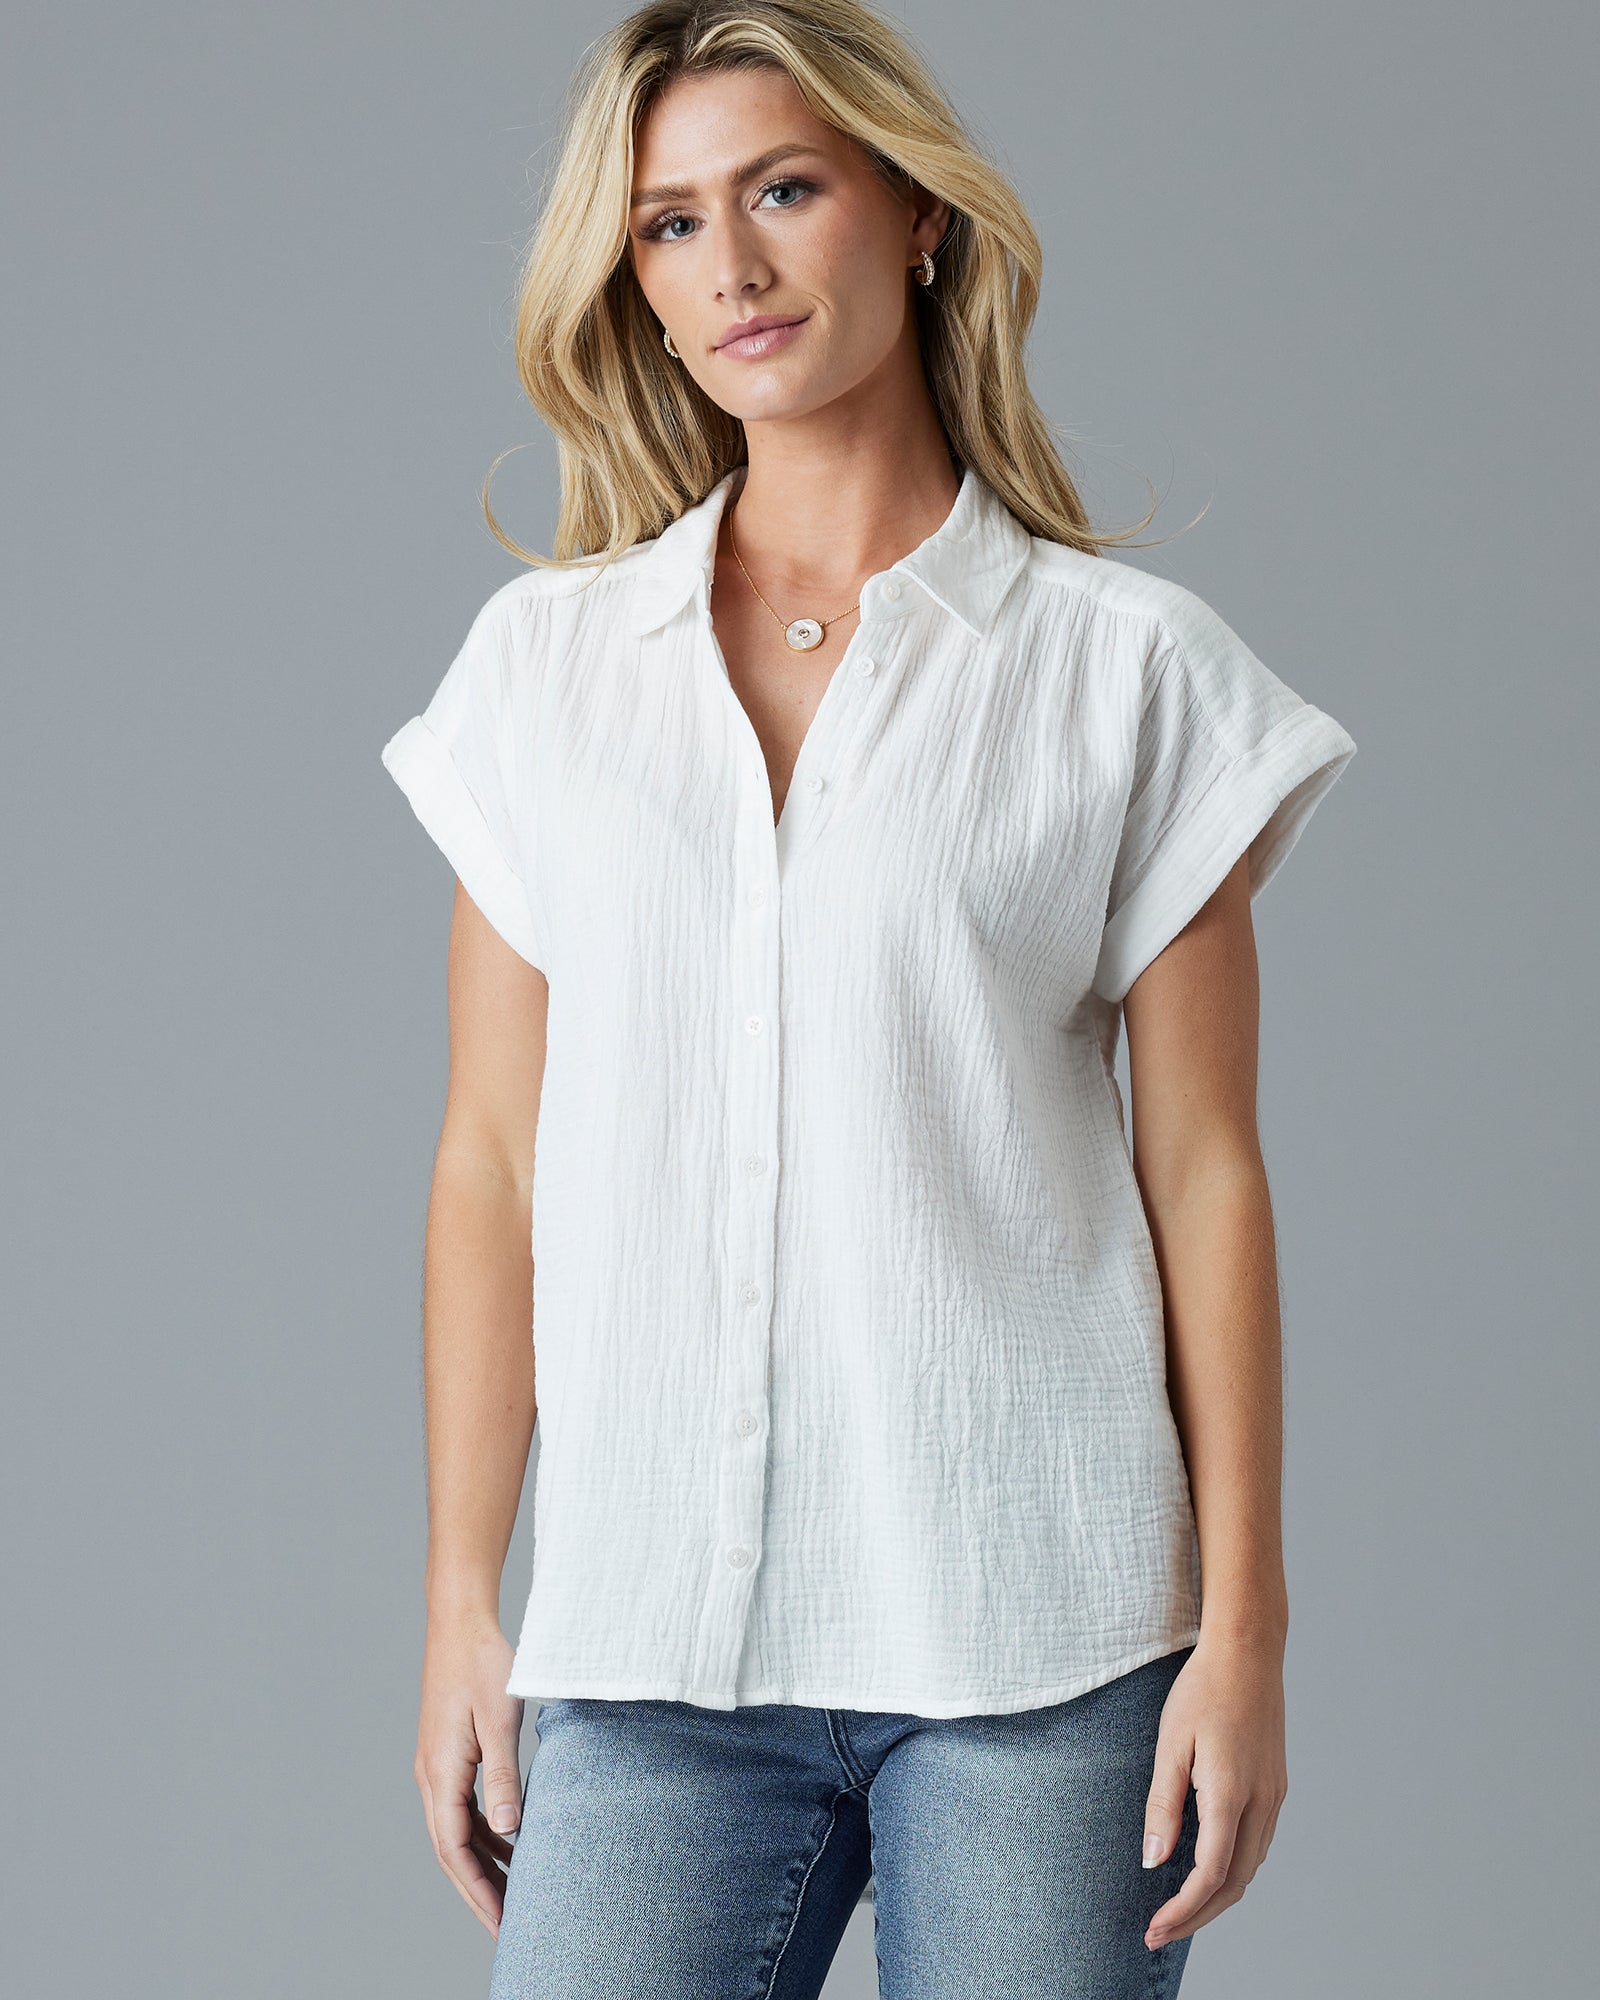 Woman in a white short sleeve buttondown blouse